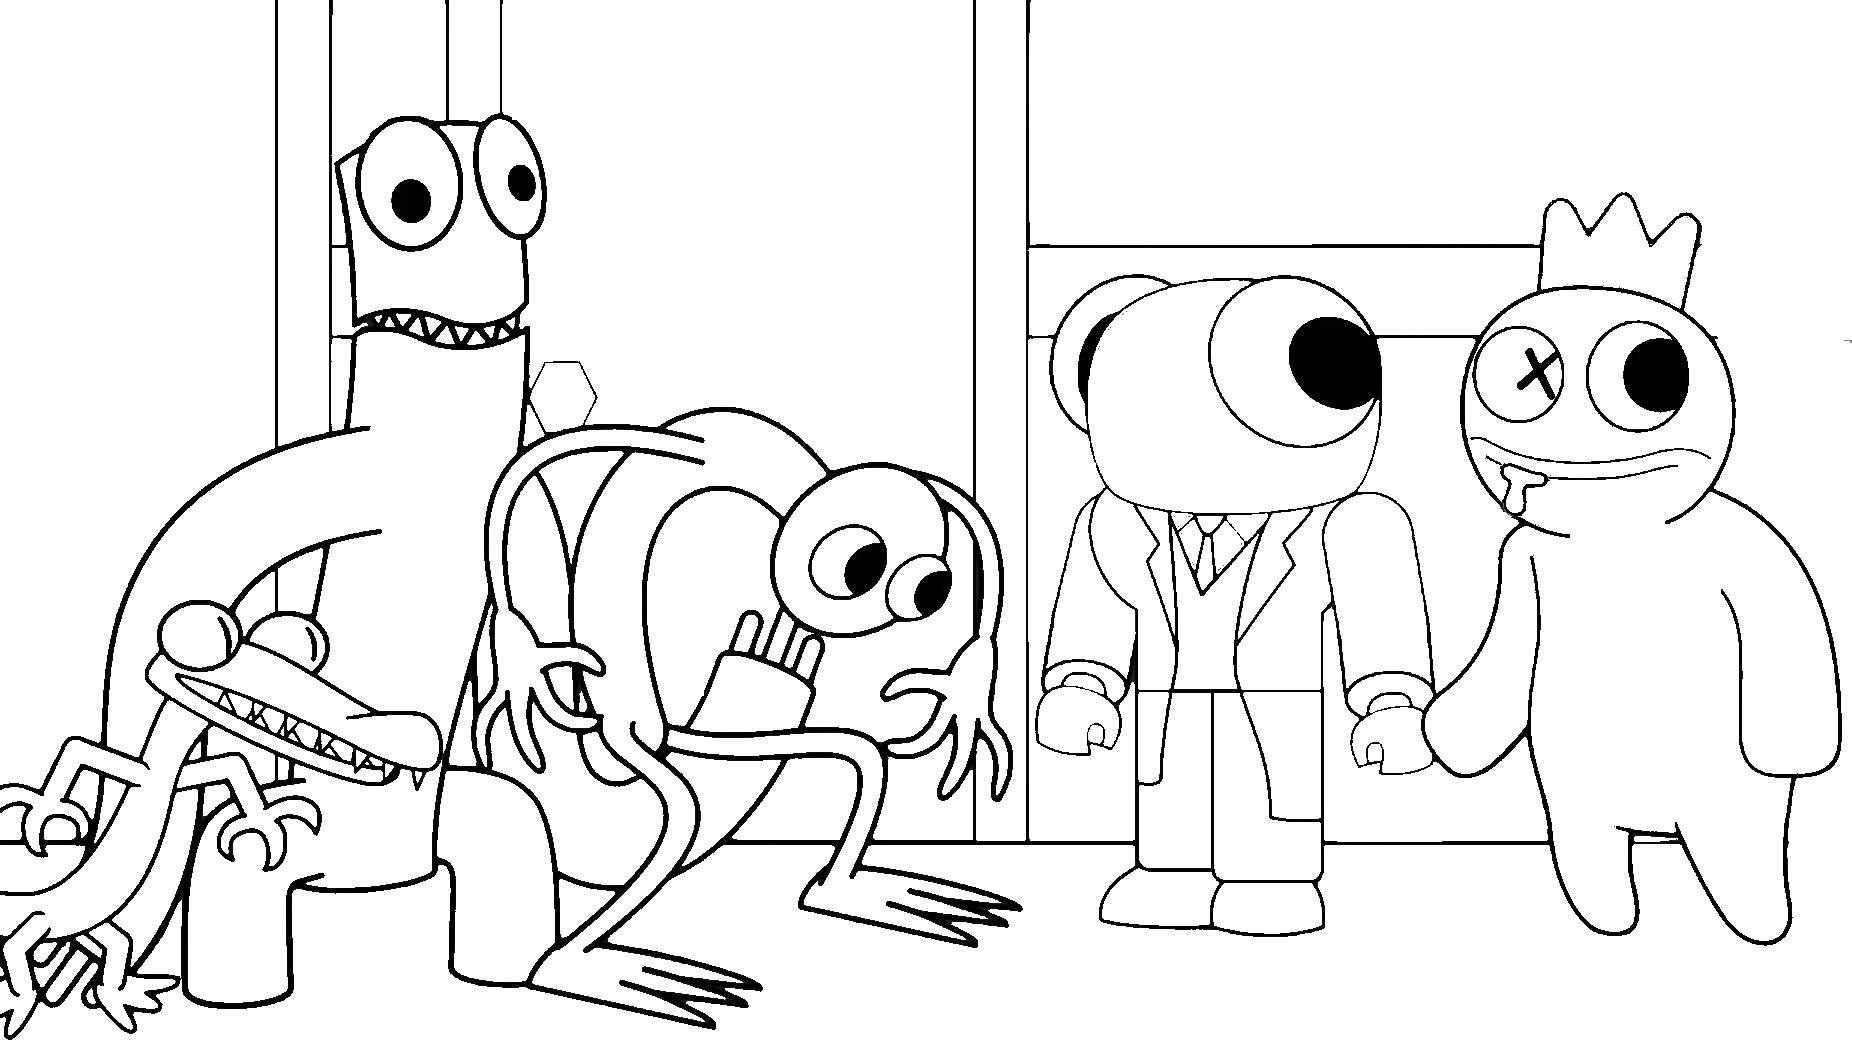 Doors coloring pages – Rainbow Friends 22 – Having fun with children